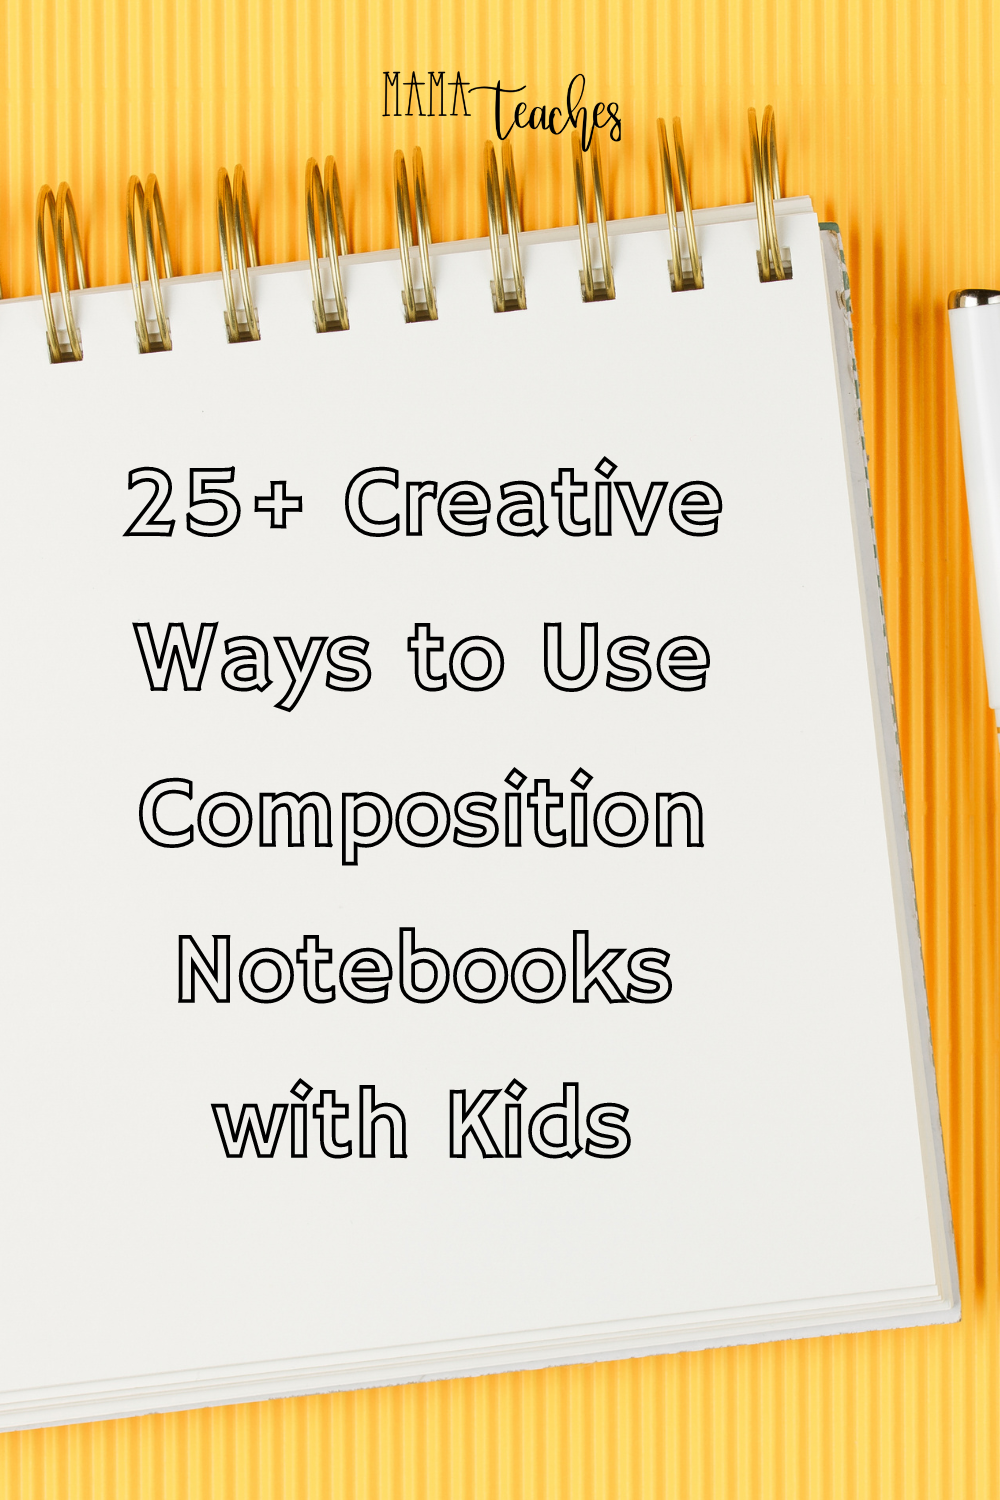 25+ Creative Ways to Use Composition Notebooks  with Kids